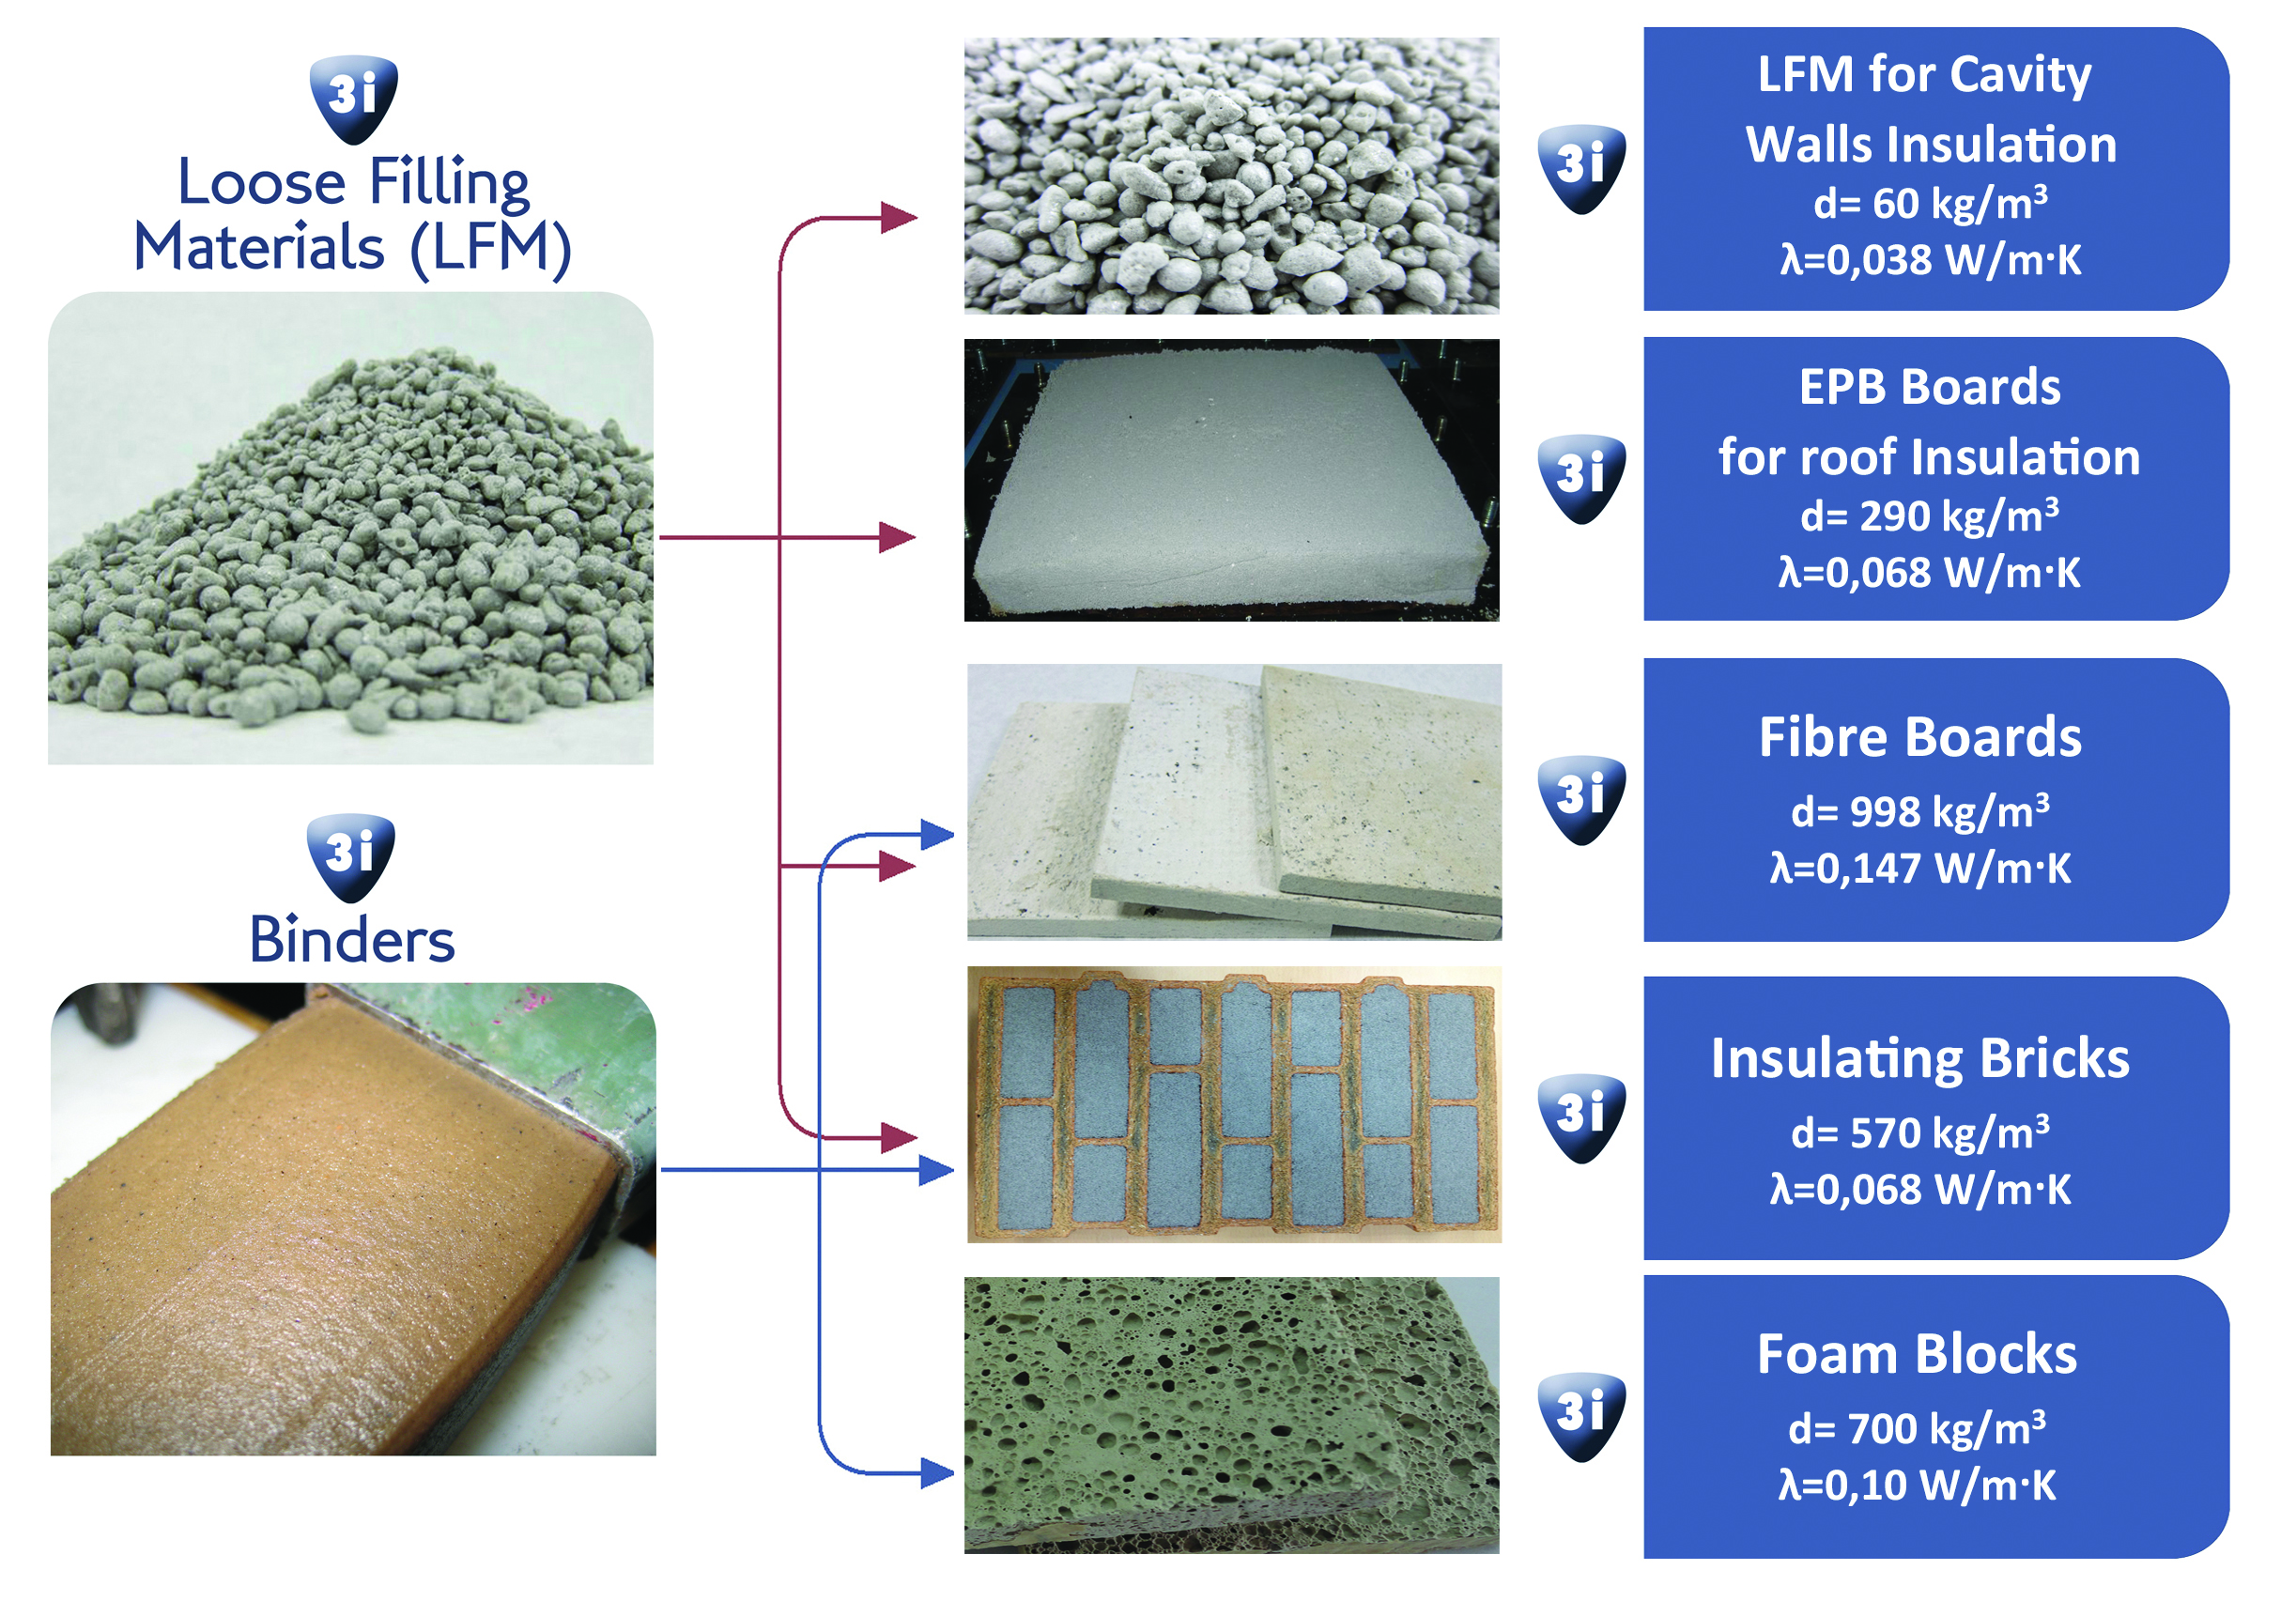 Low embodied energy, advanced materials and insulating masonry components for energy efficient buildings